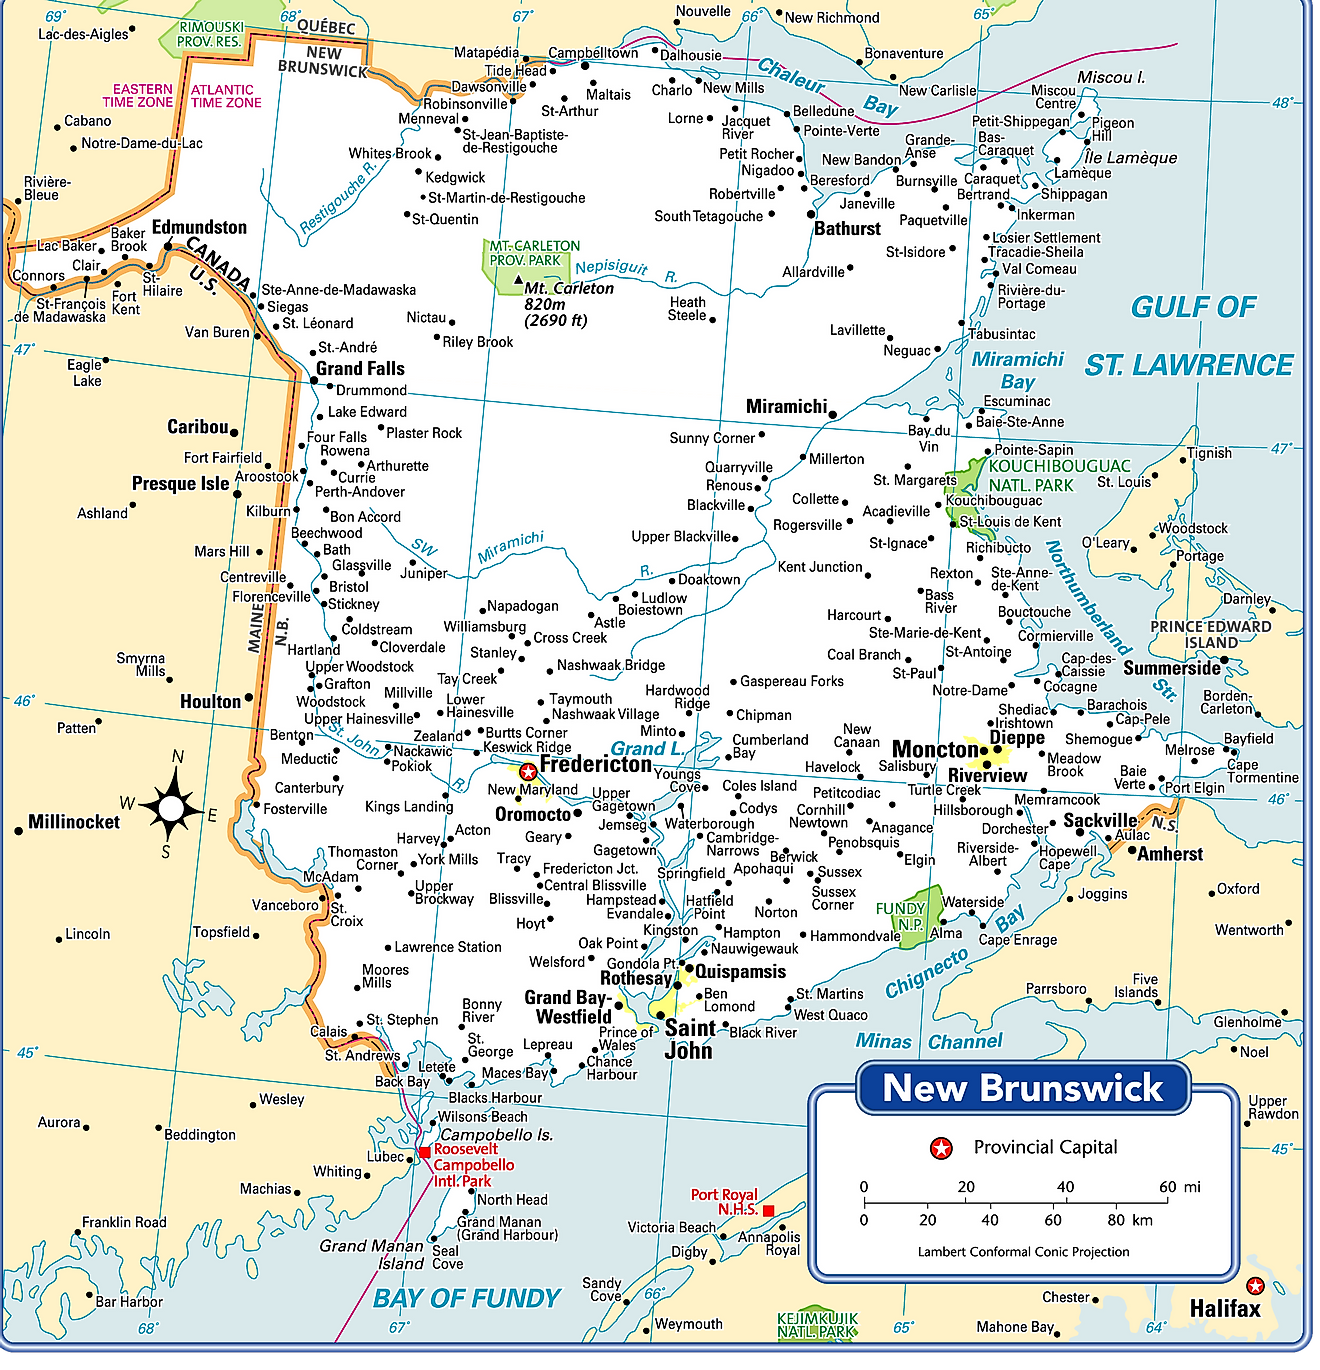 Map of New Brunswick showing its various cities/towns including the capital of Fredericton